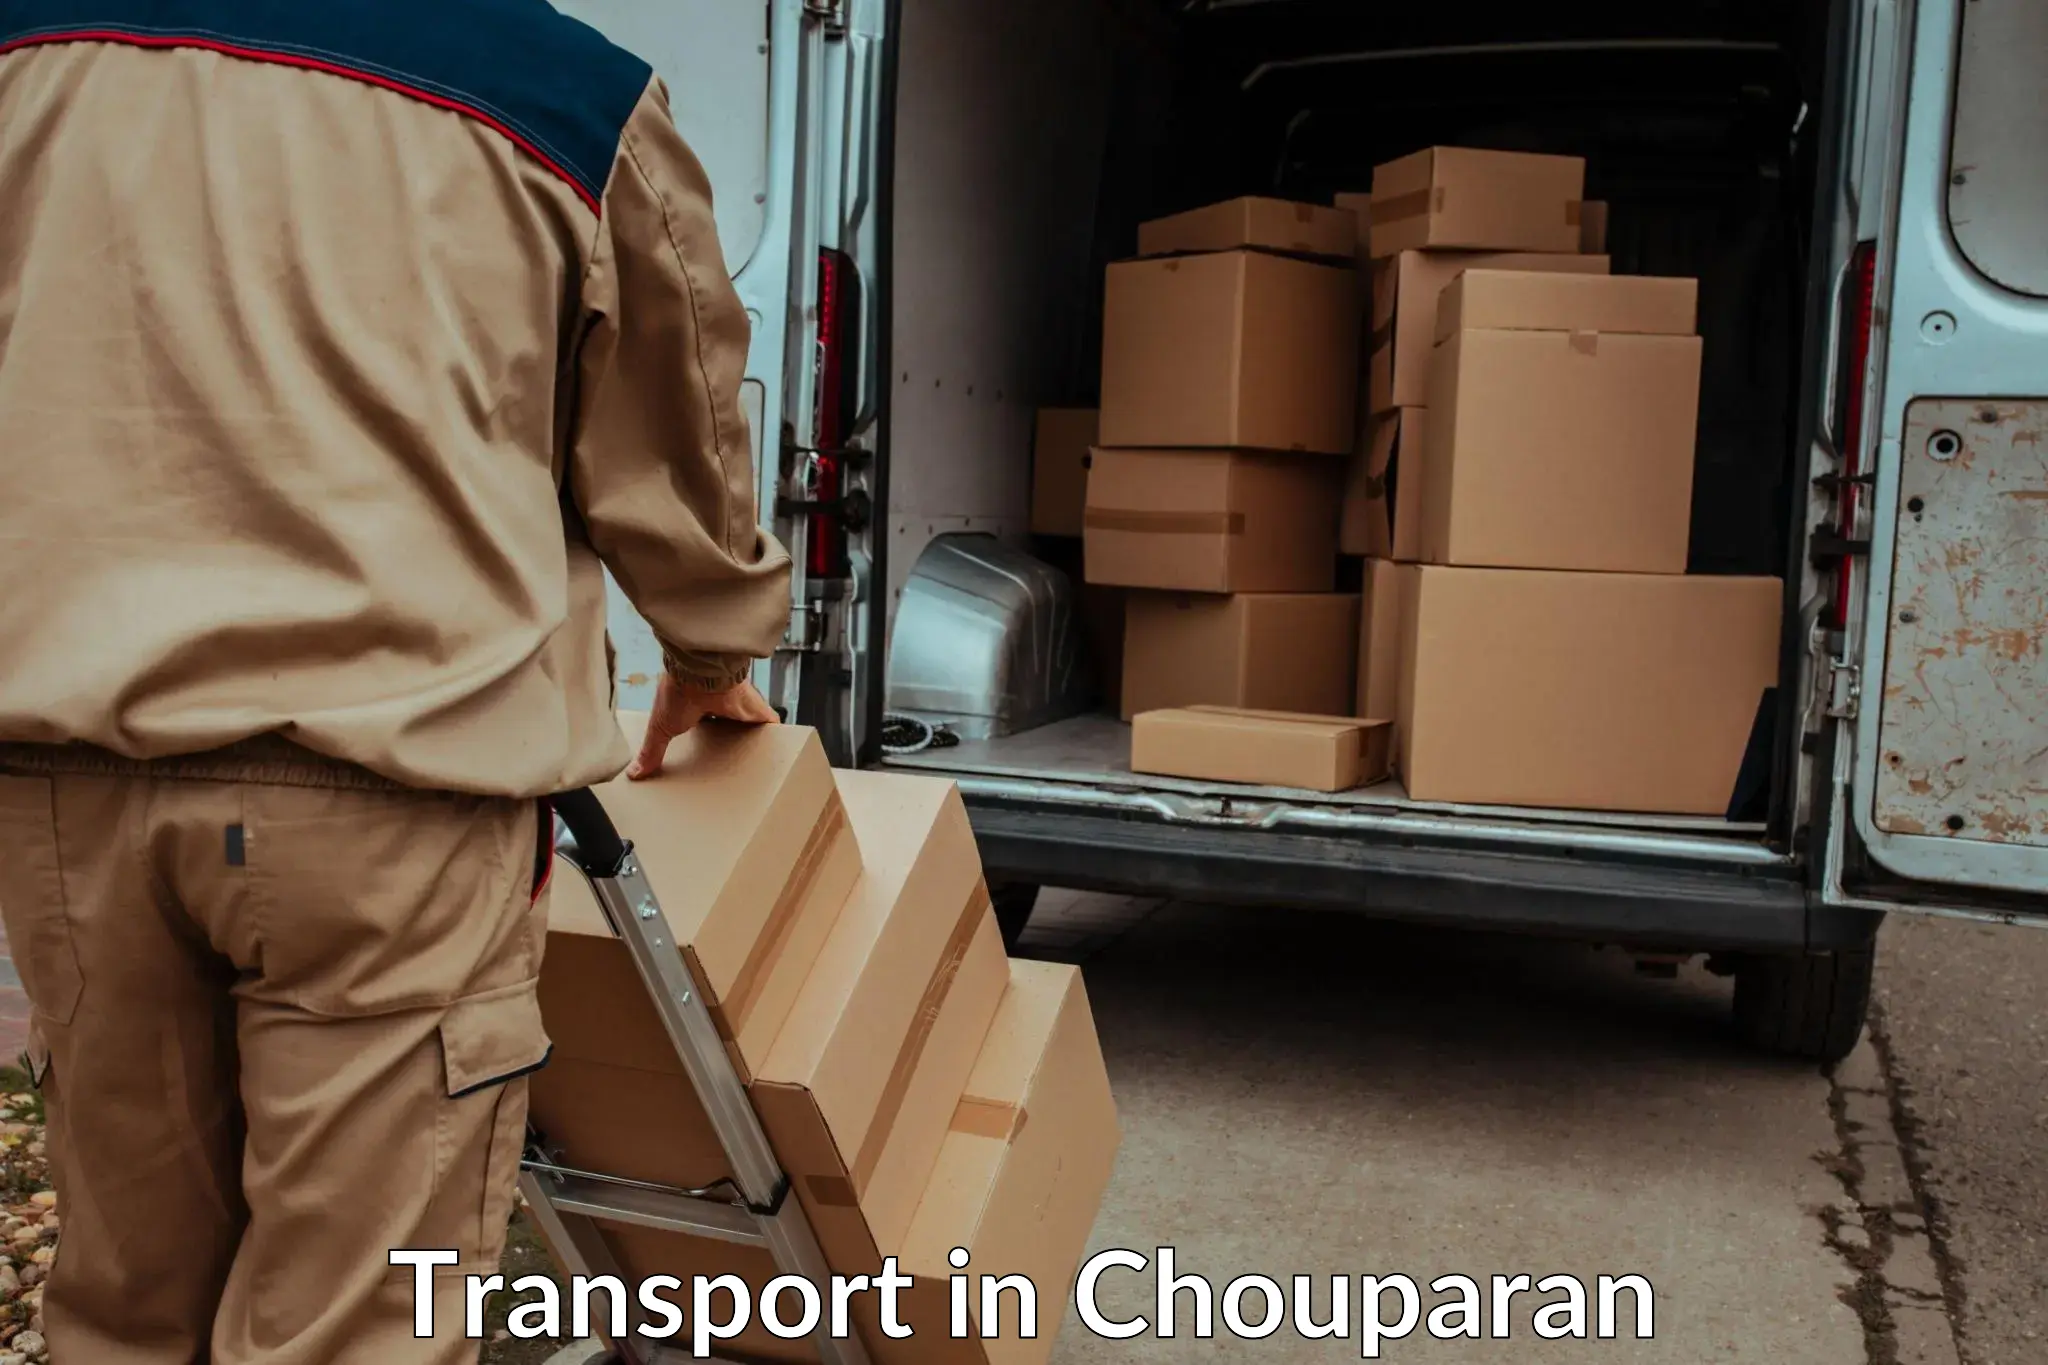 Container transport service in Chouparan